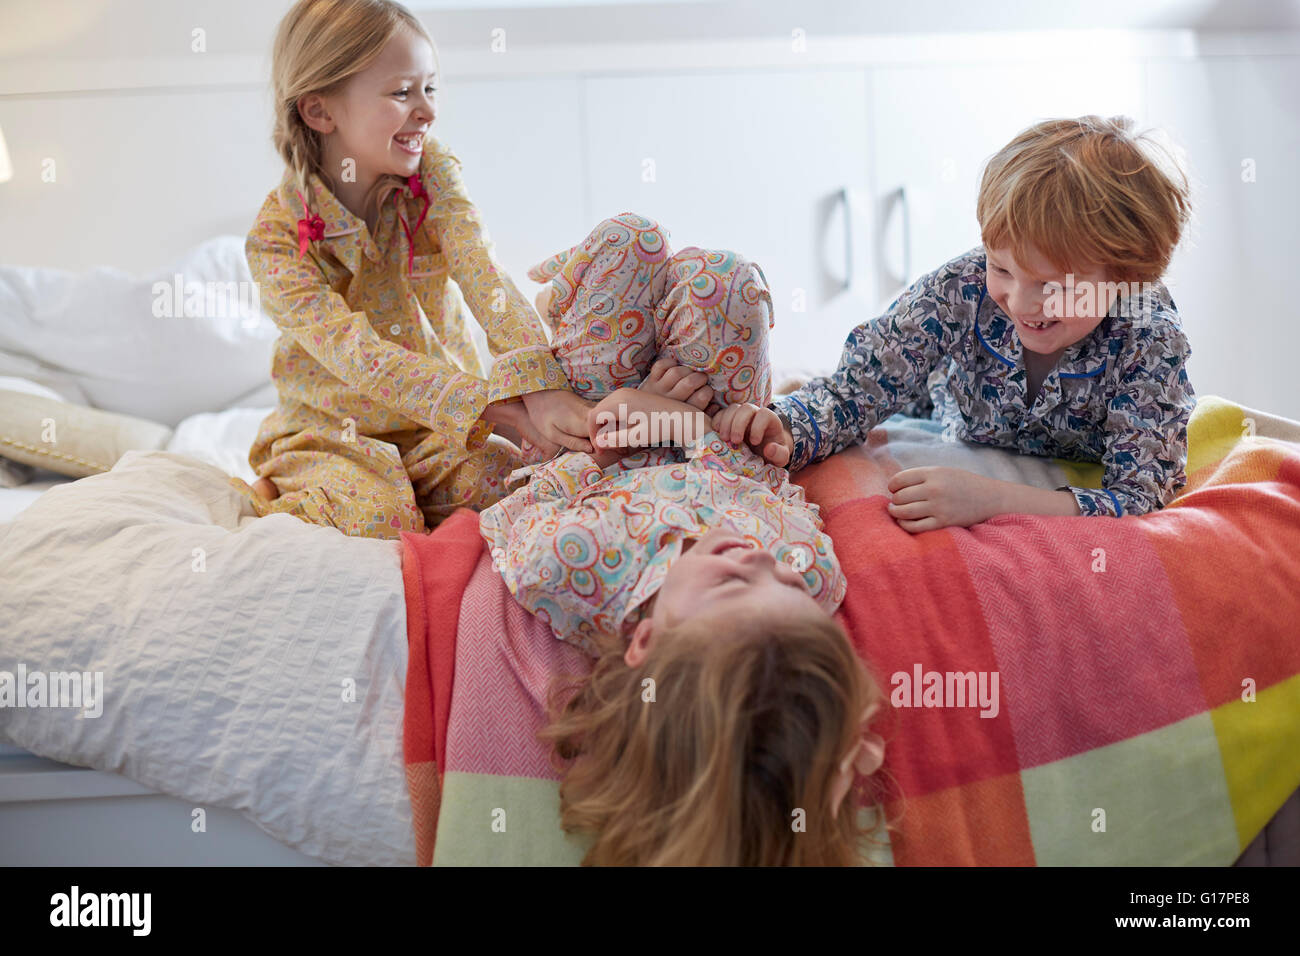 Children playing in bed Stock Photo